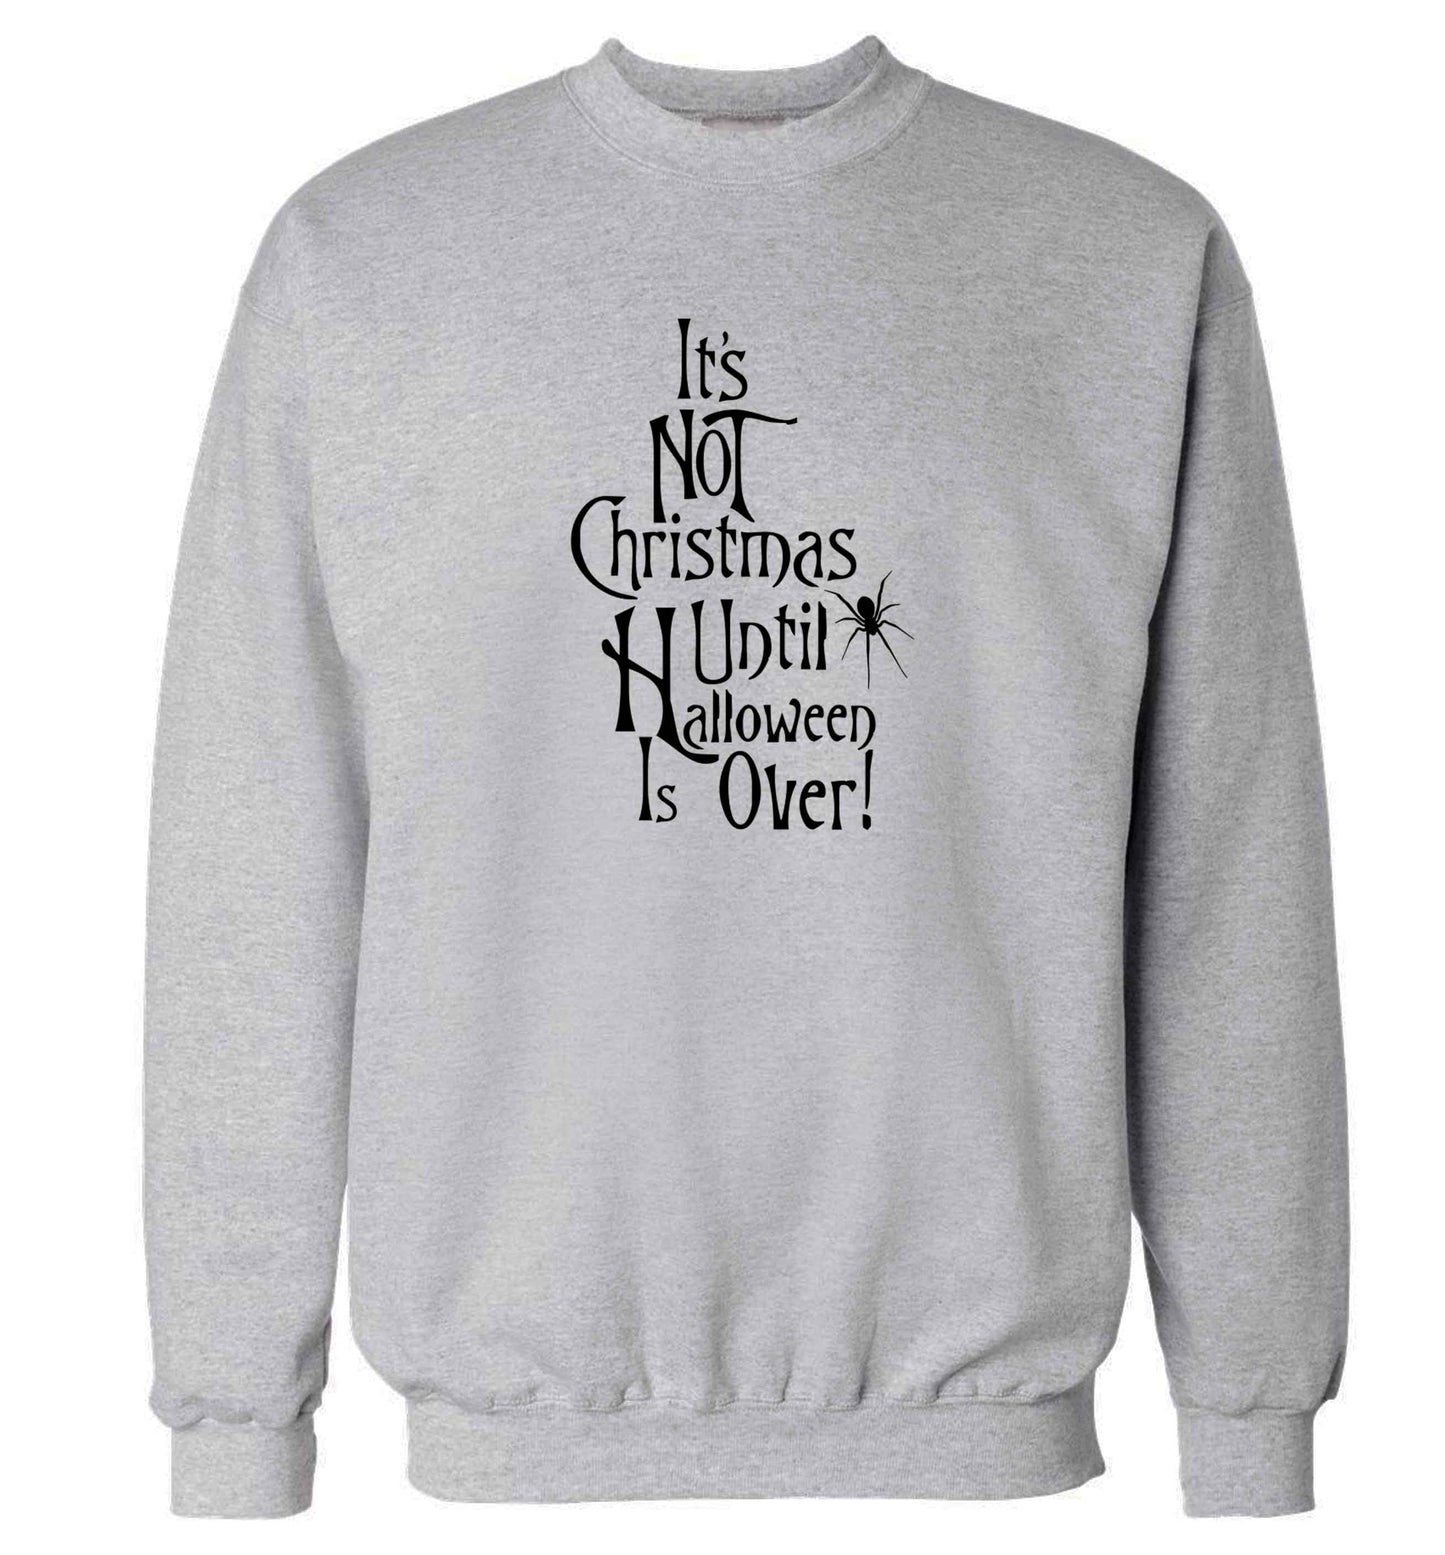 It's not Christmas until Halloween is over adult's unisex grey sweater 2XL